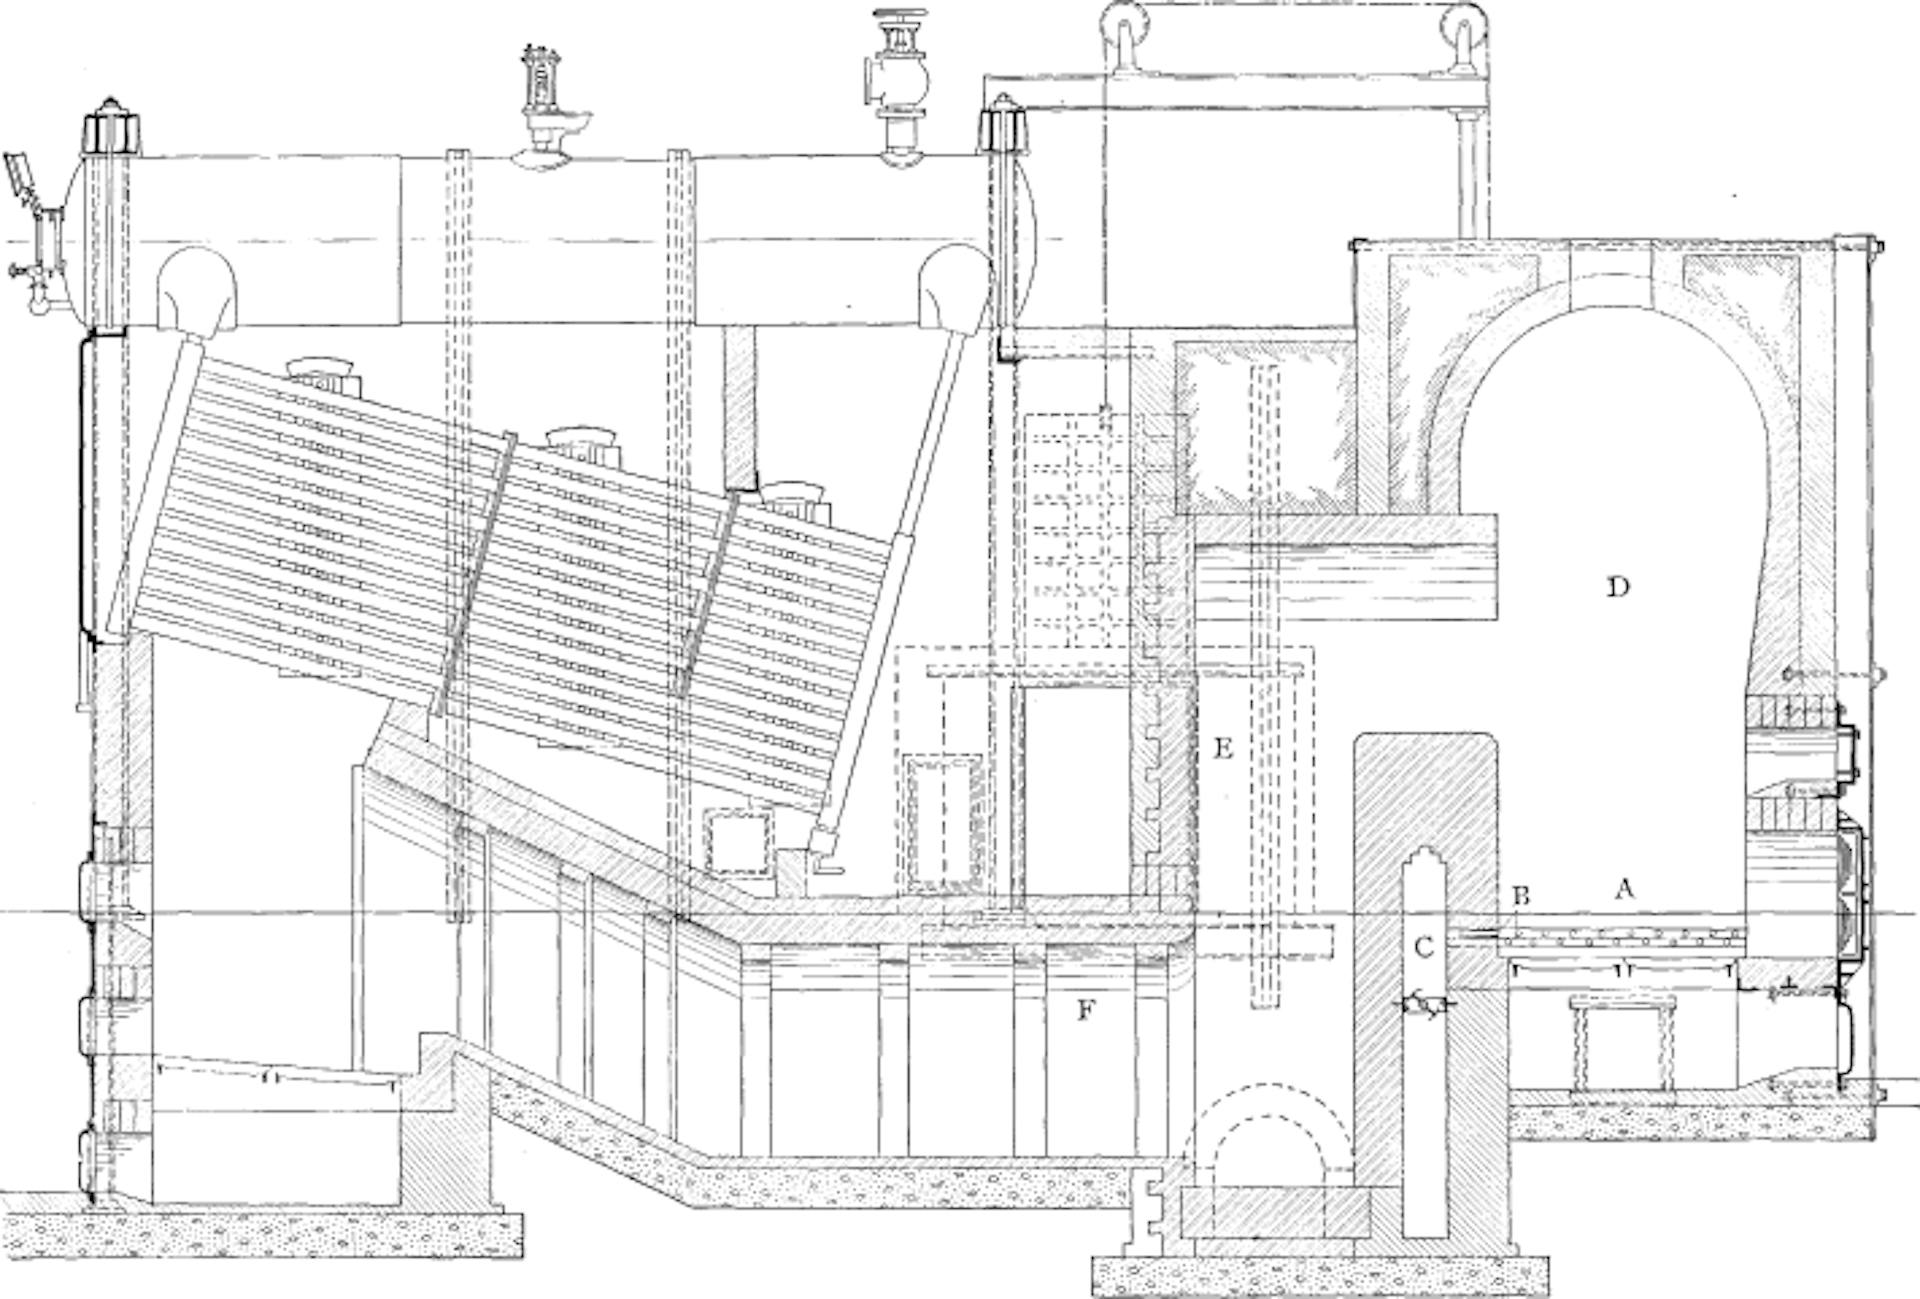 Fig. 27. Babcock & Wilcox Boiler Set with Green Bagasse Furnace